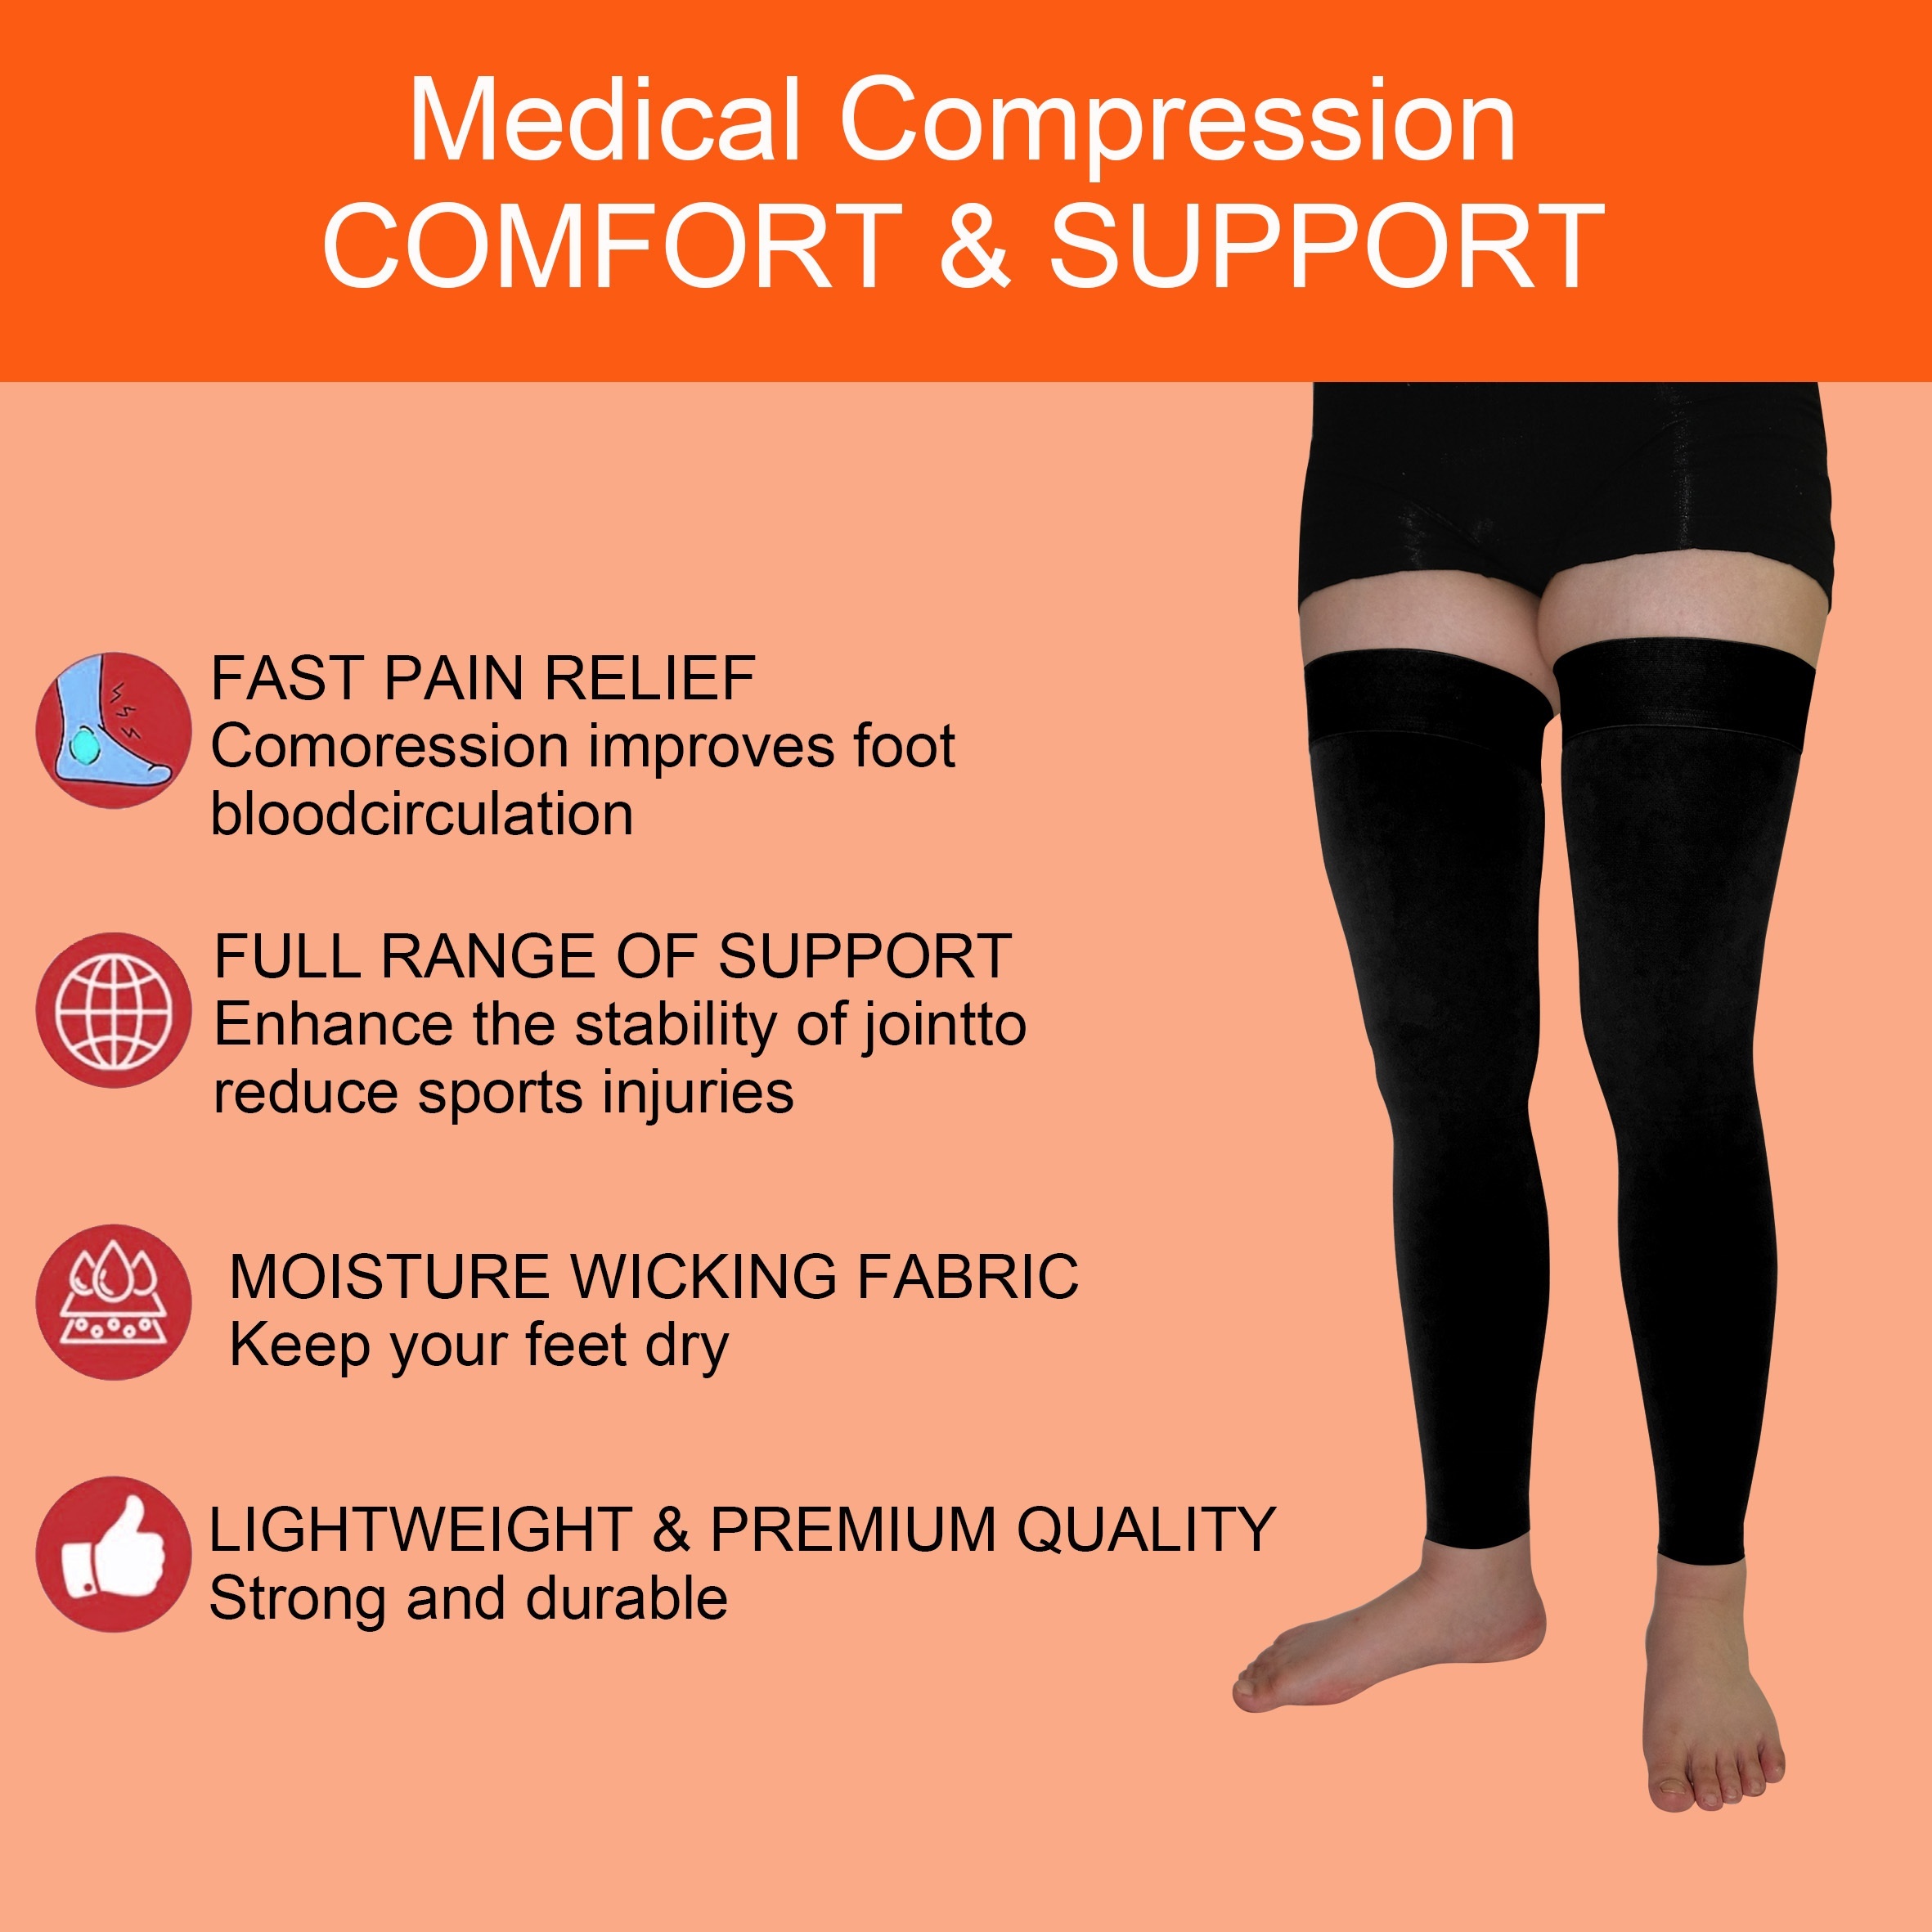 Thigh High Compression Stocking Footless, 20-30mmHg Compression Socks with  Silicone Band, Varicose Veins -Large 20-30mmhg Footless Black - Large